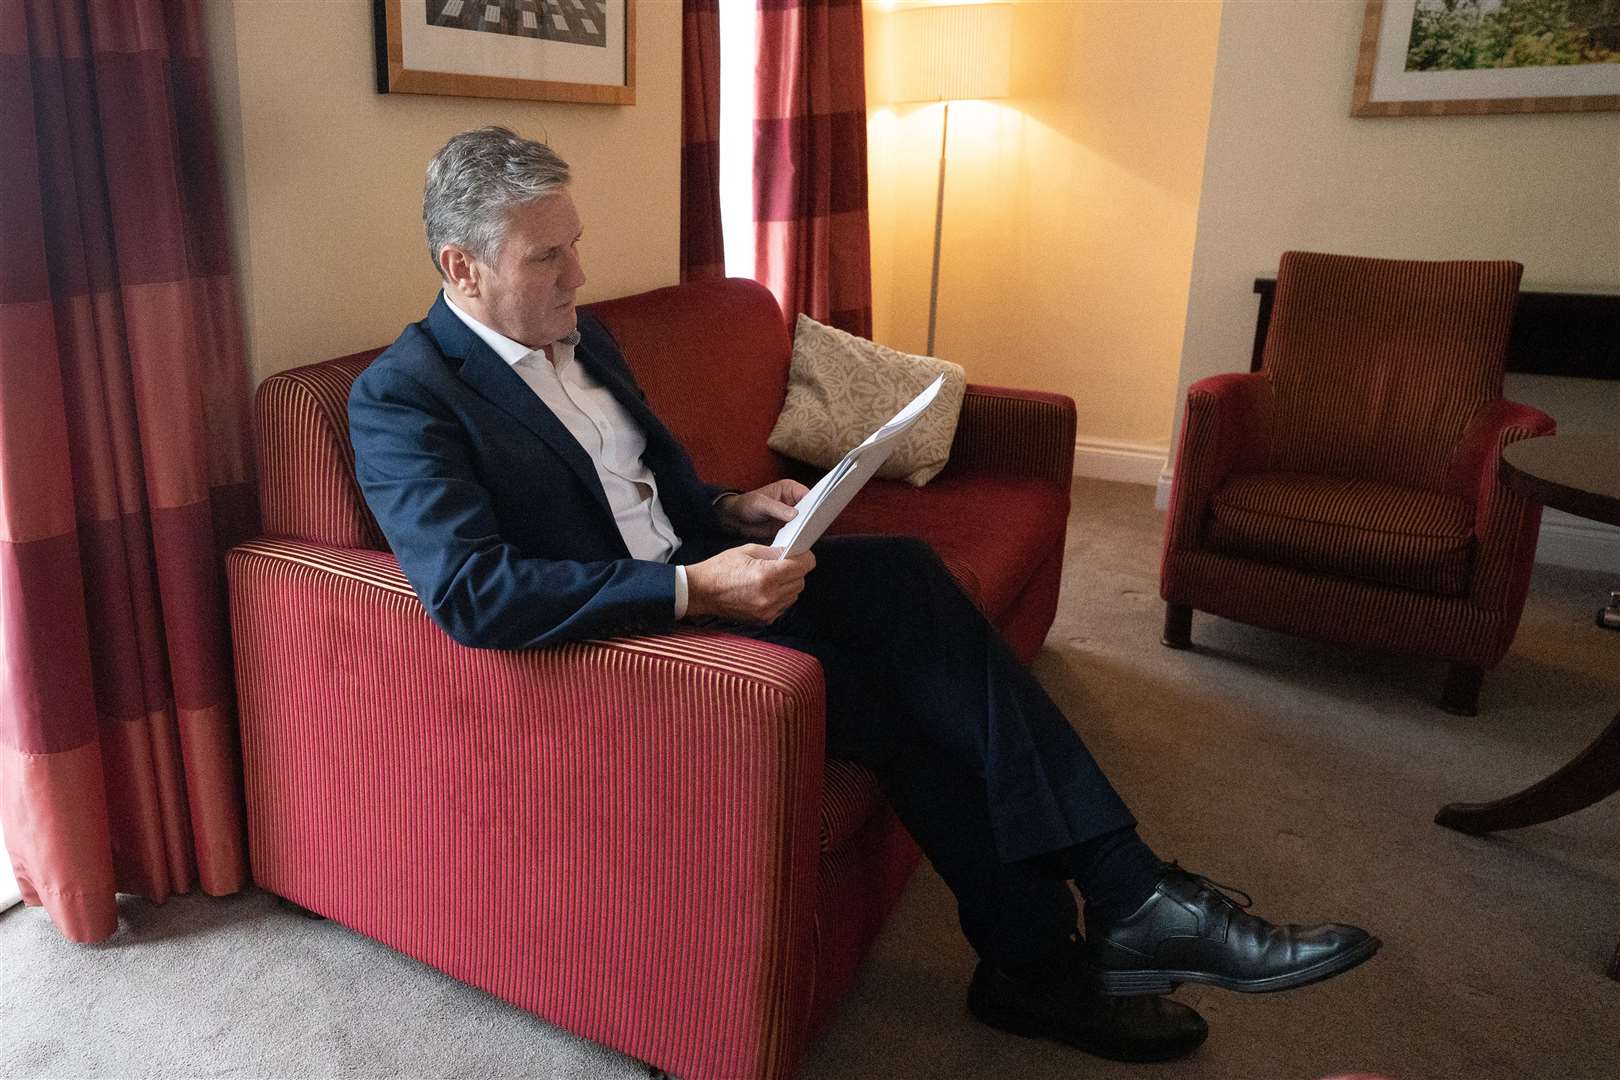 Labour leader, Sir Keir Starmer prepares his Labour Party conference speech in his hotel room in Brighton (Stefan Rousseau/PA)